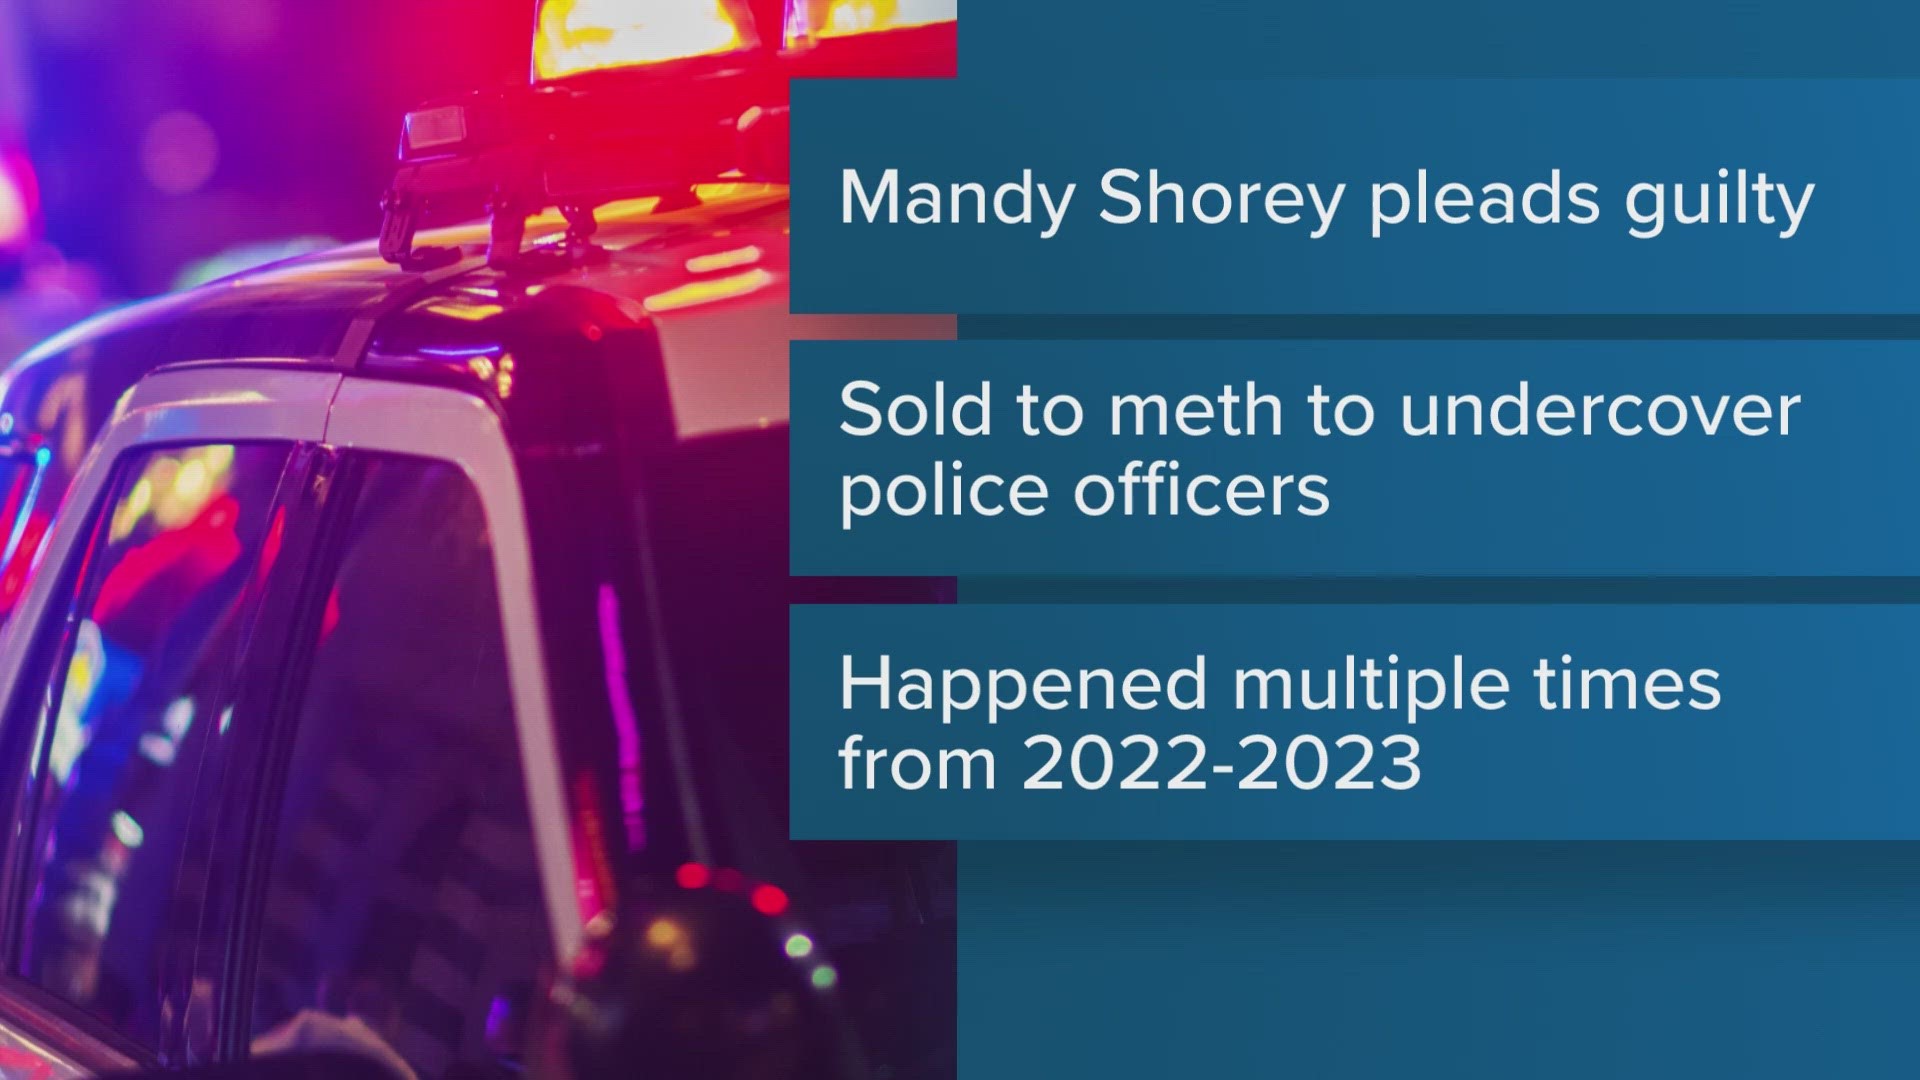 Mandy Shorey of Peru pleaded guilty to drug-related charges that she sold methamphetamine. Investigators say she sold drugs to an undercover officer several times.